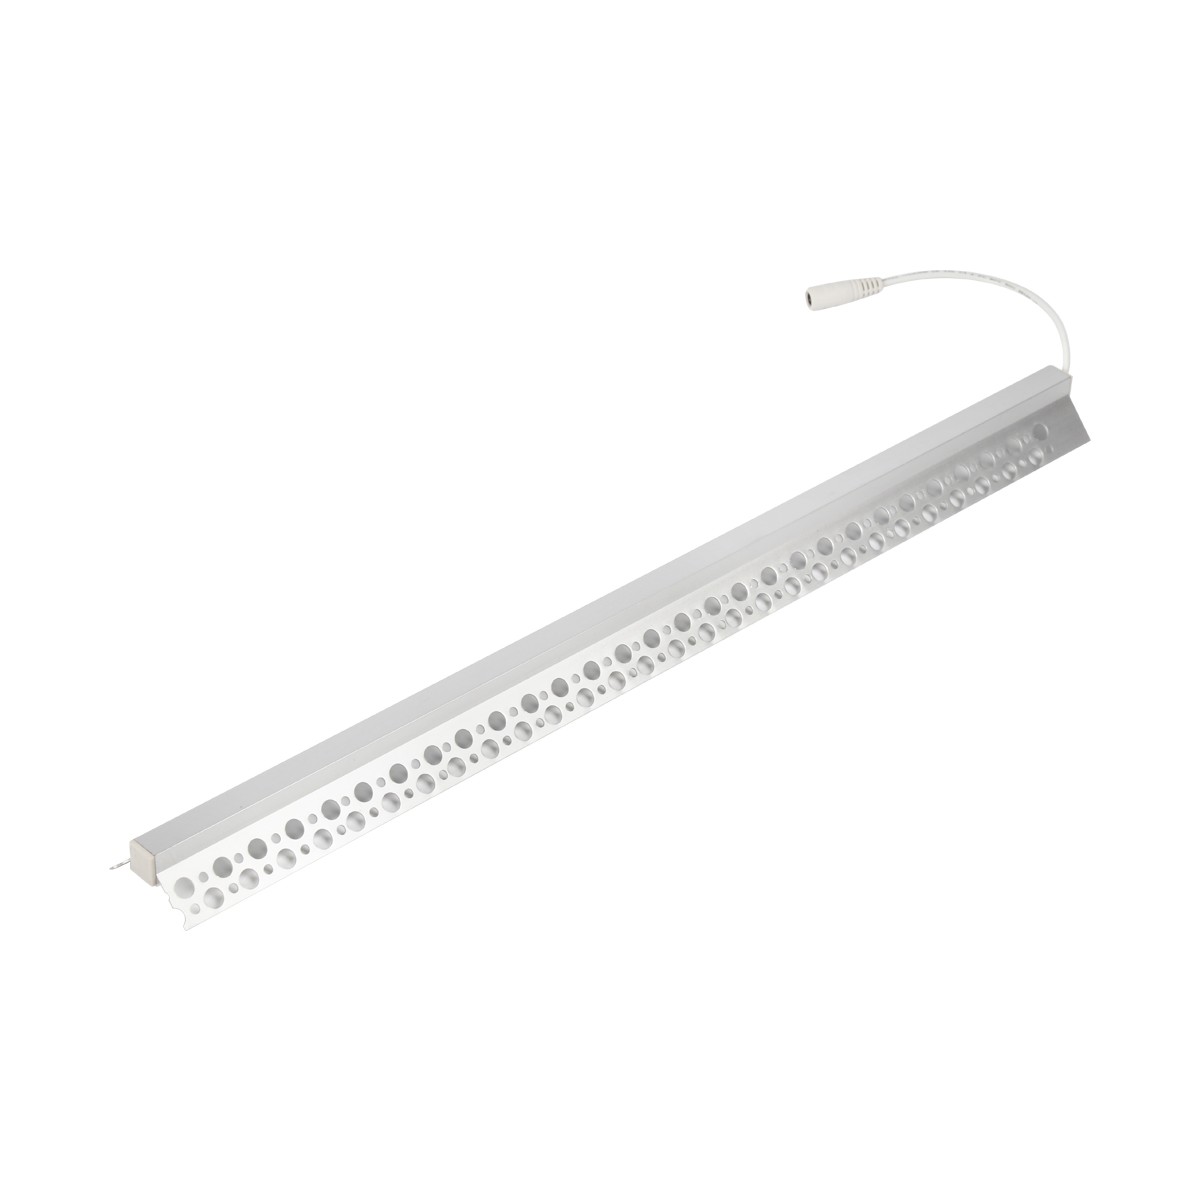 Embedded line lamp gypsum lace aluminum footing line LED rigid light bar can be buried in the wall